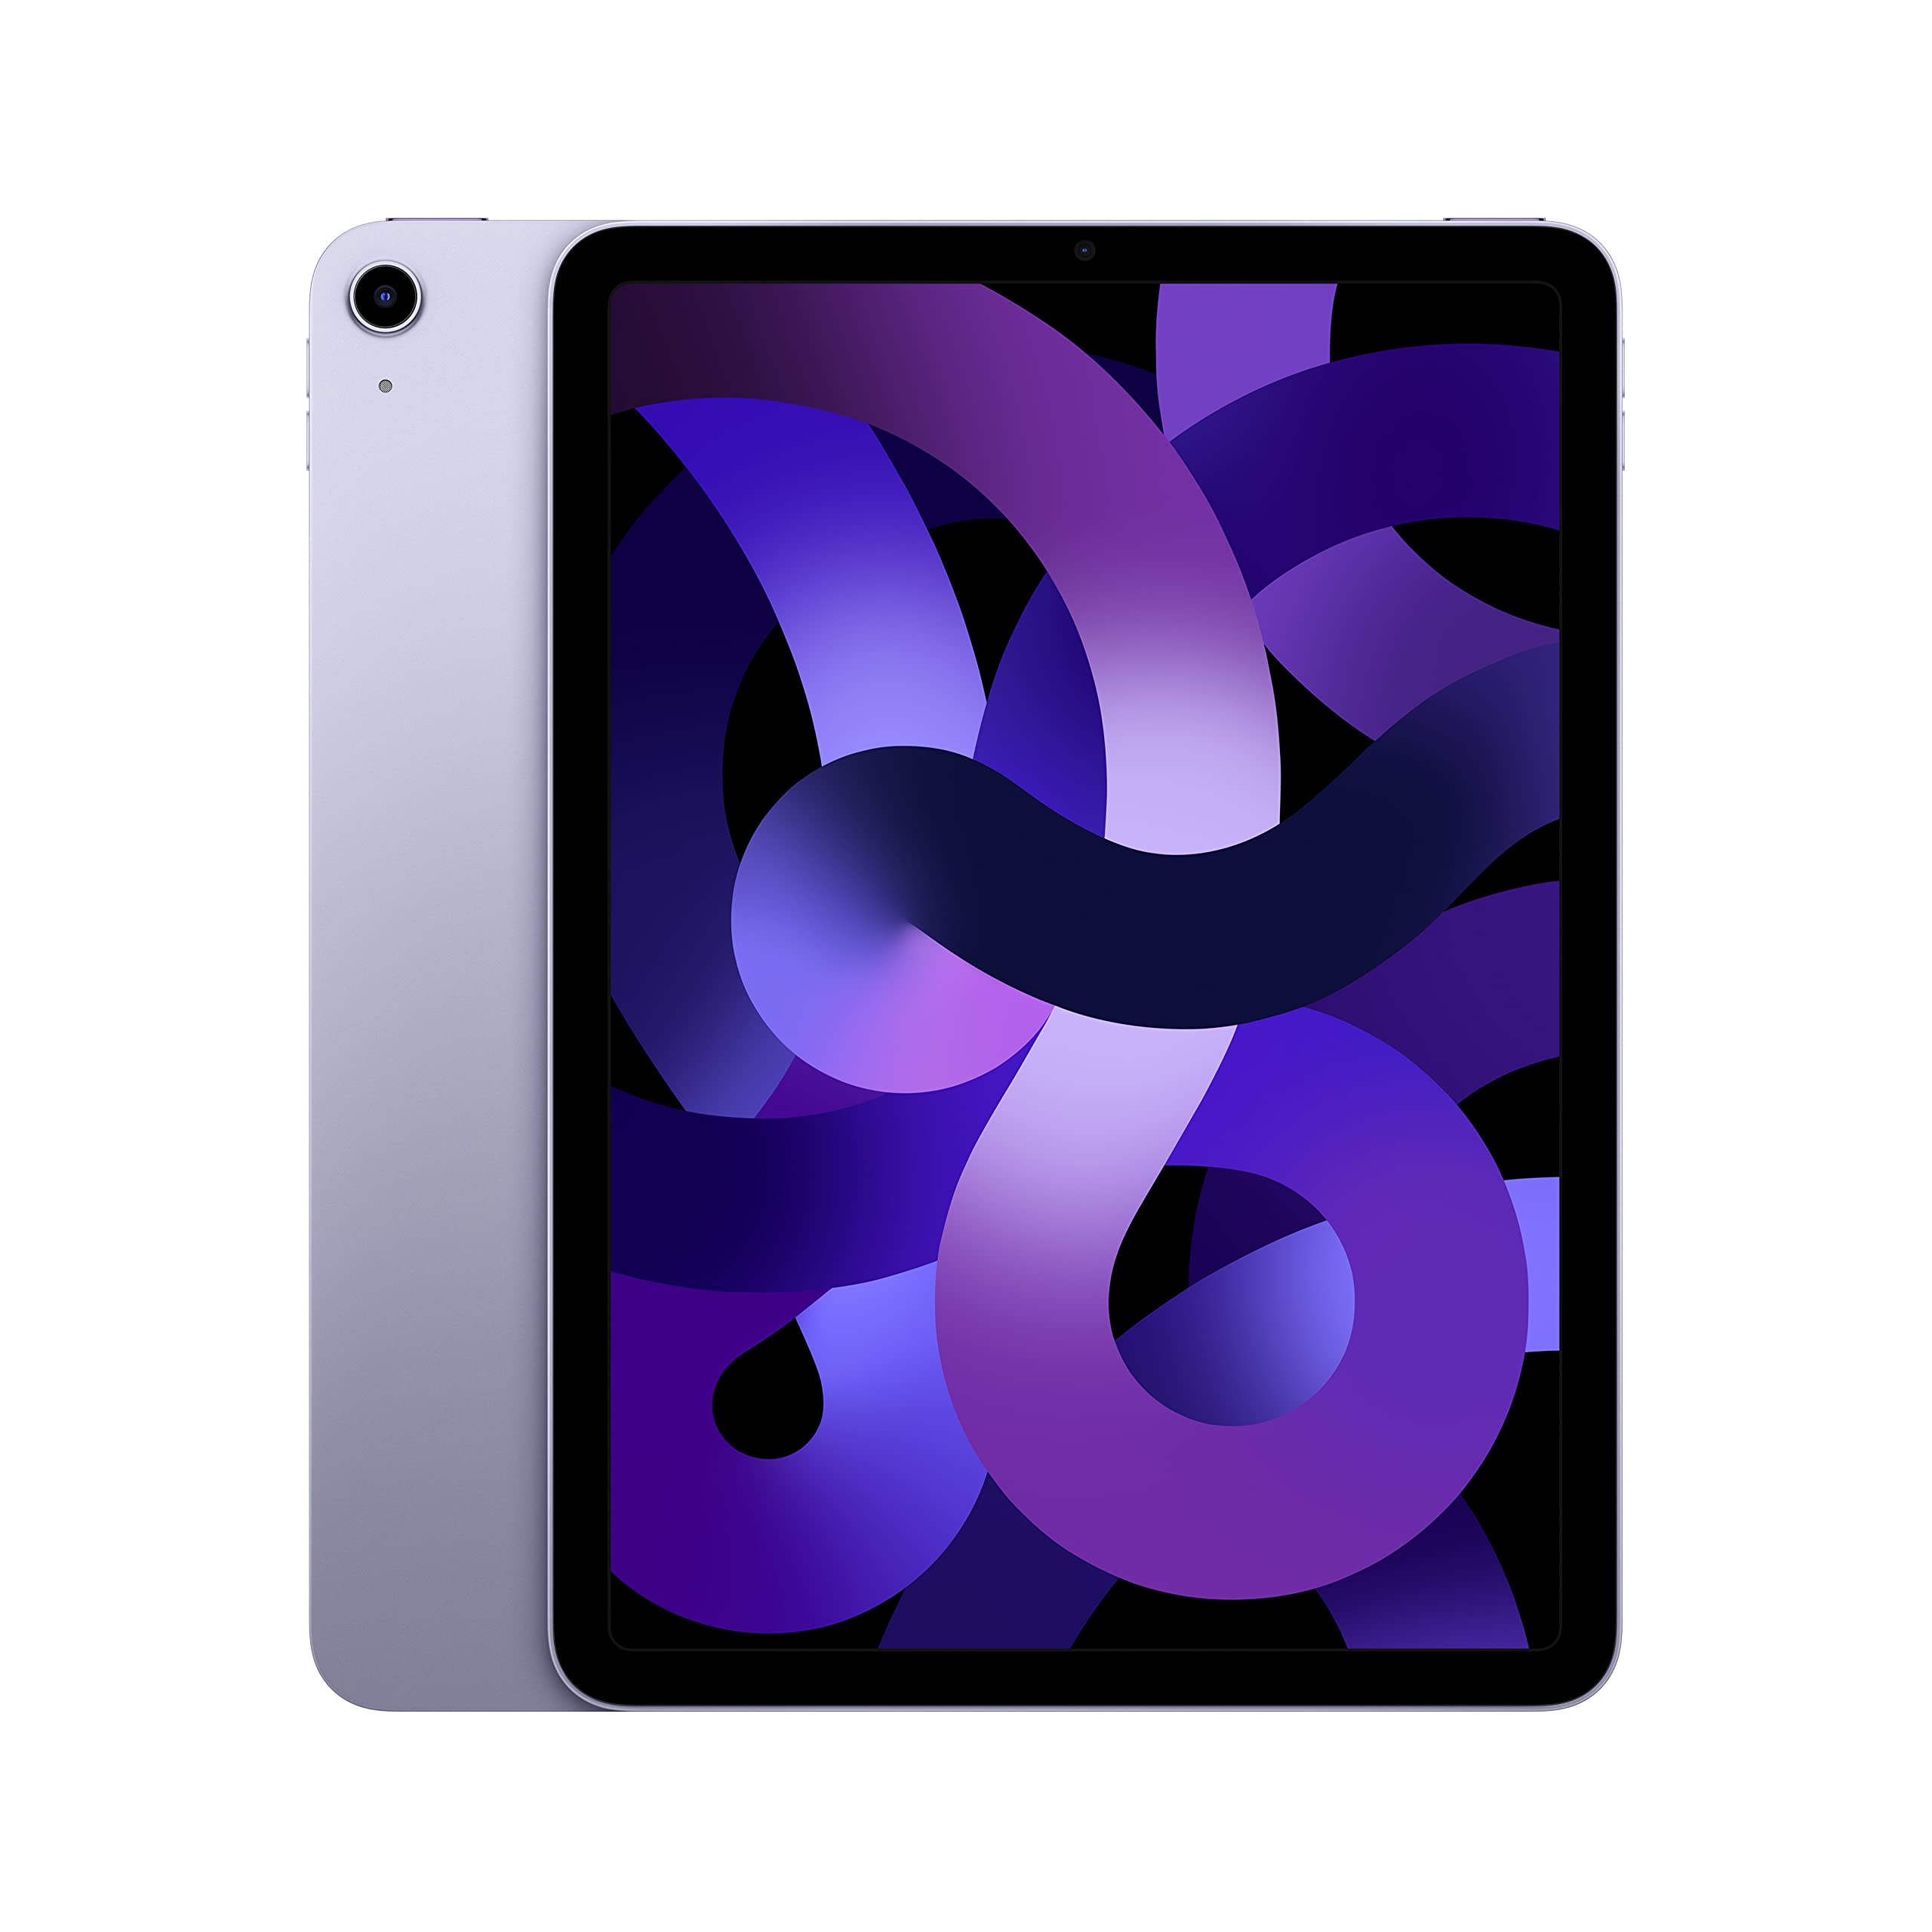 Apple iPad Air (5th Generation): with M1 chip, 10.9-inch Liquid Retina Display, 256GB, Wi-Fi 6, 12MP front/12MP Back Camera, Touch ID, All-Day Battery Life – Purple